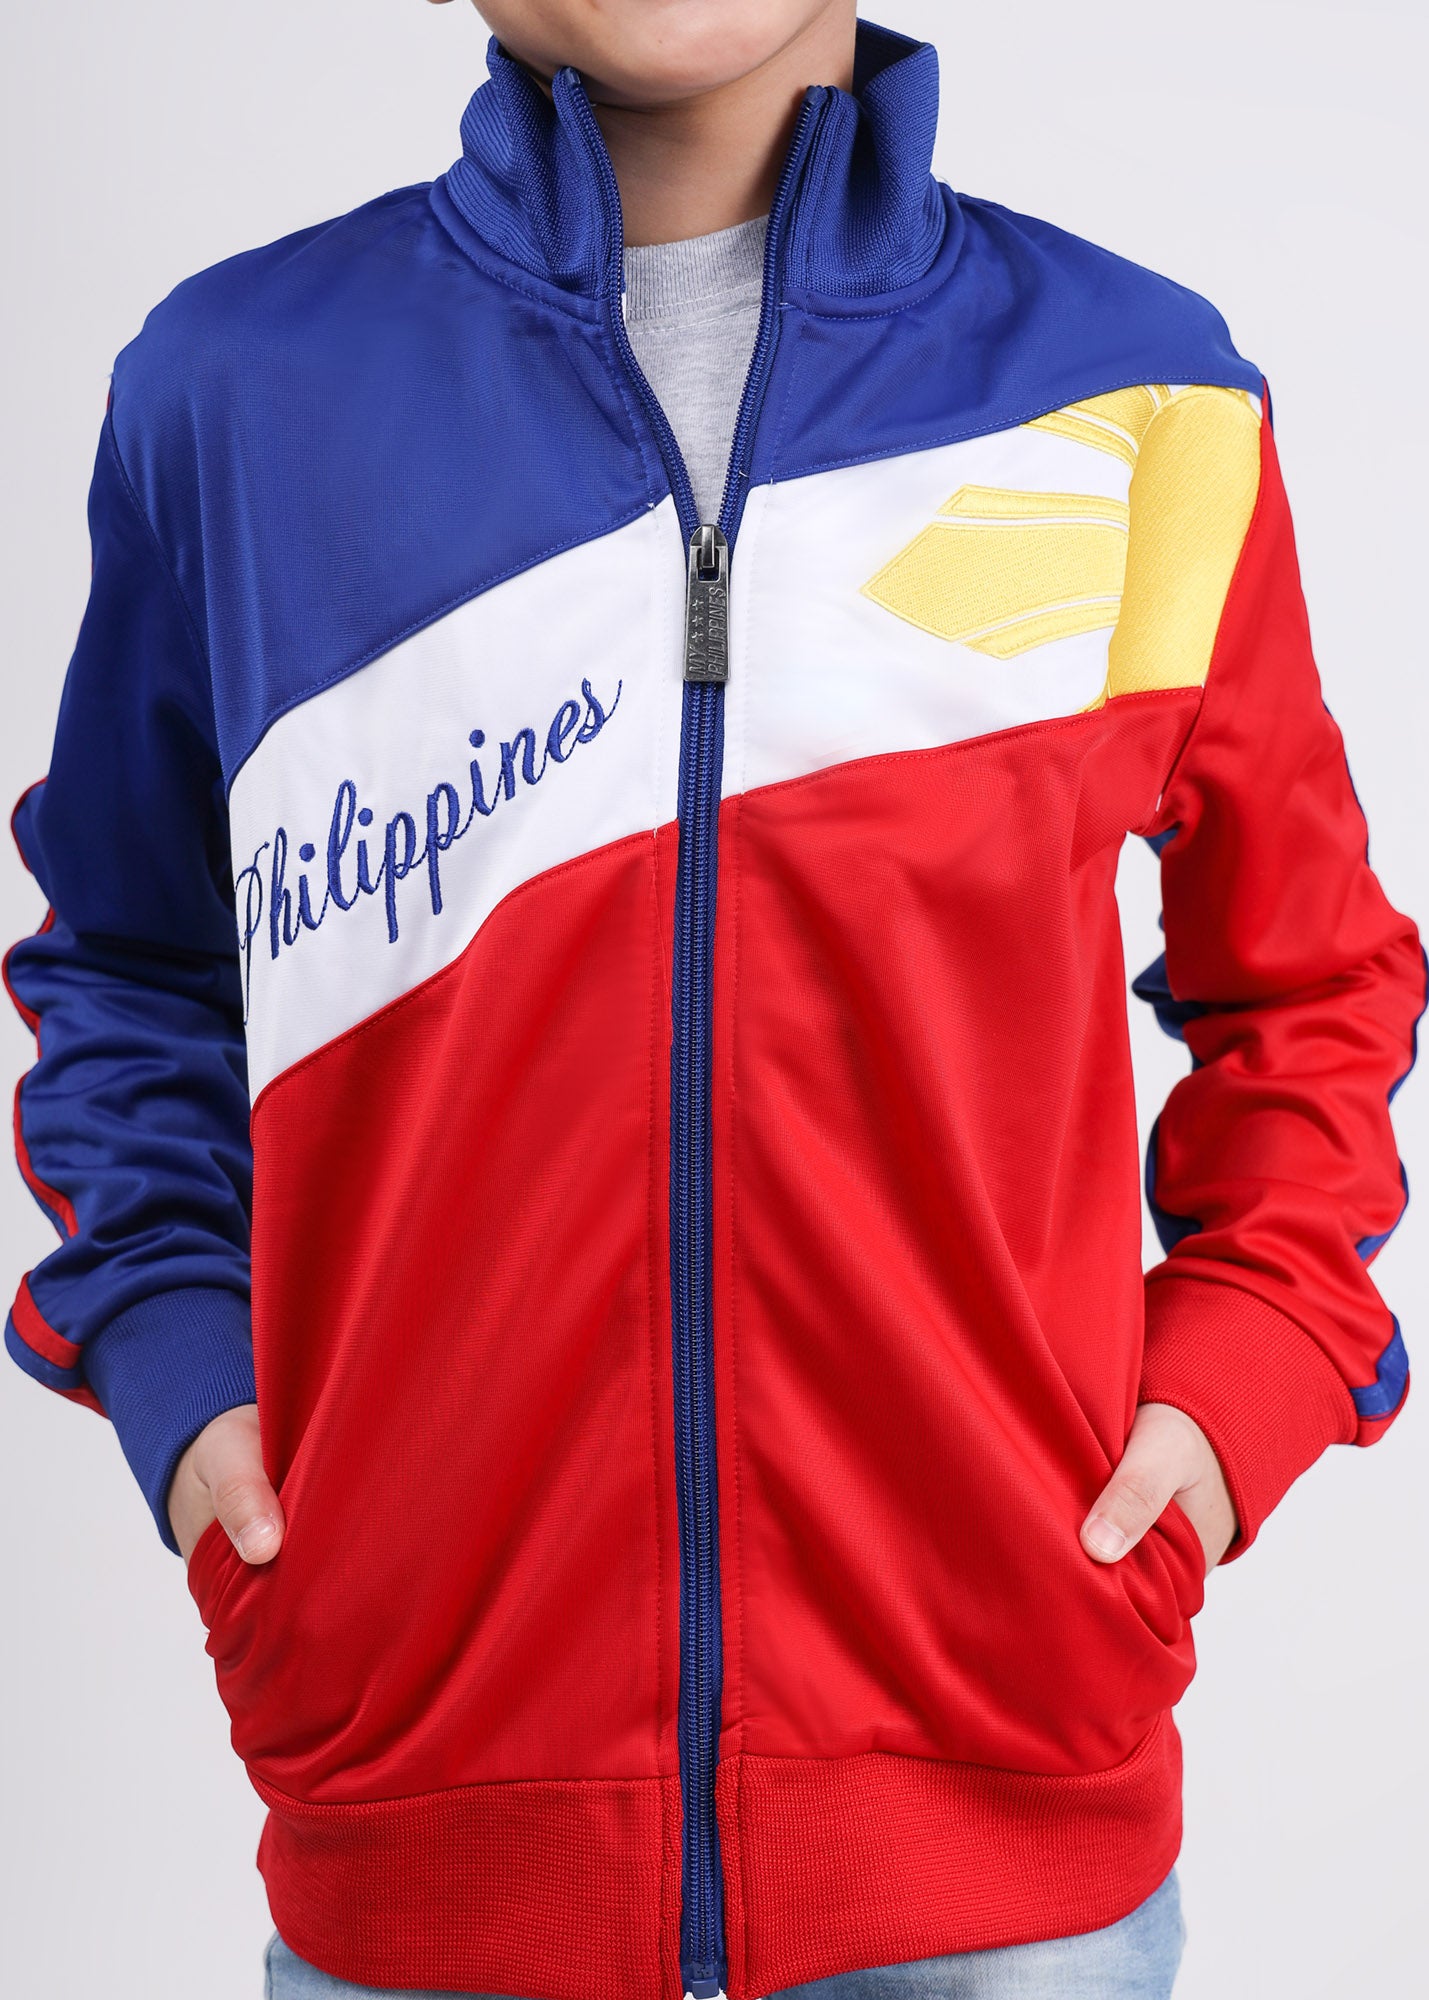 Star and Sun Flag Jacket for Kids